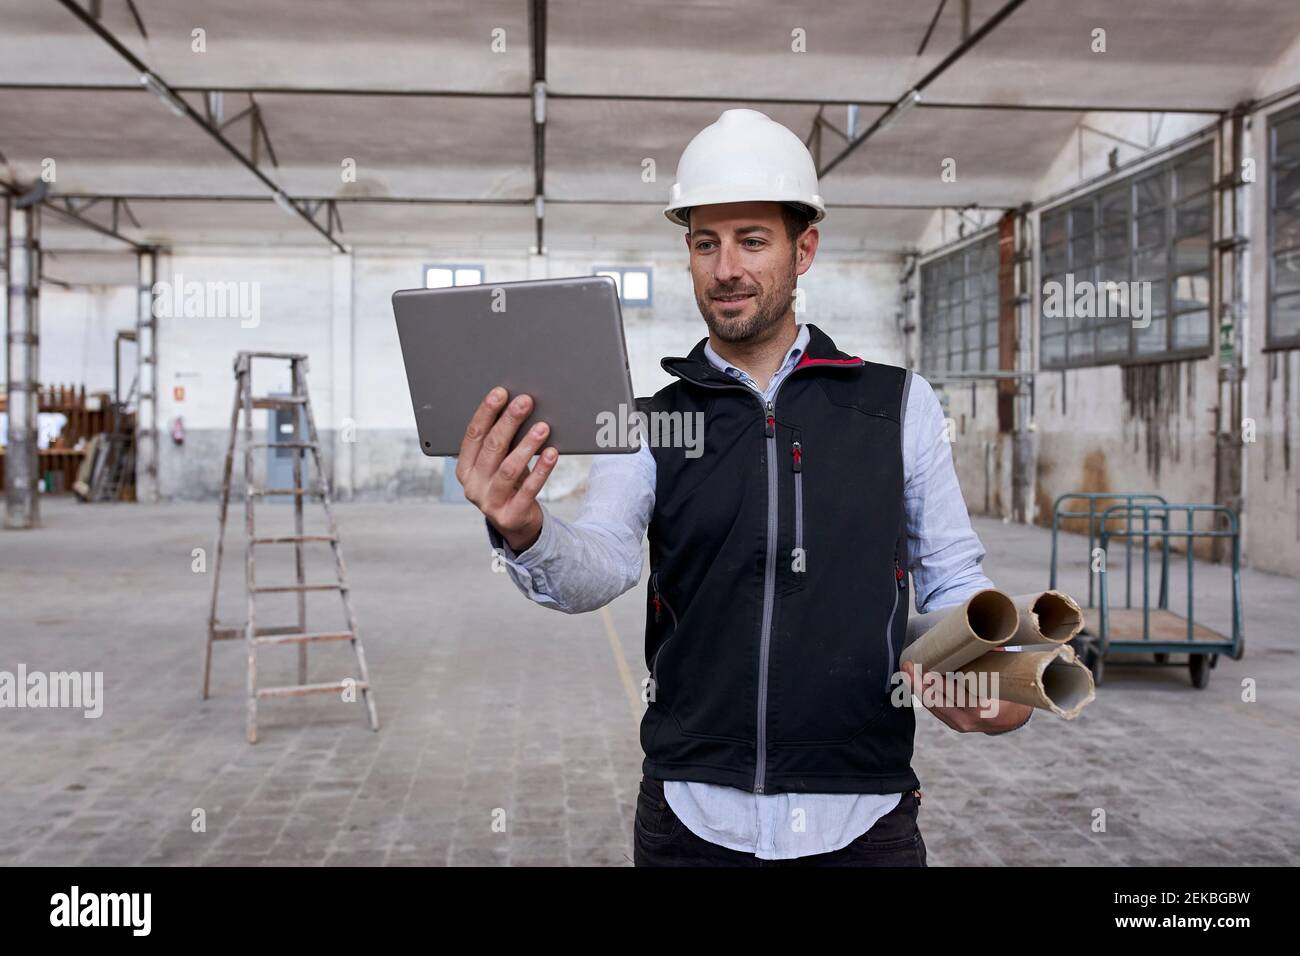 Male real estate developer using digital tablet while working in building Stock Photo